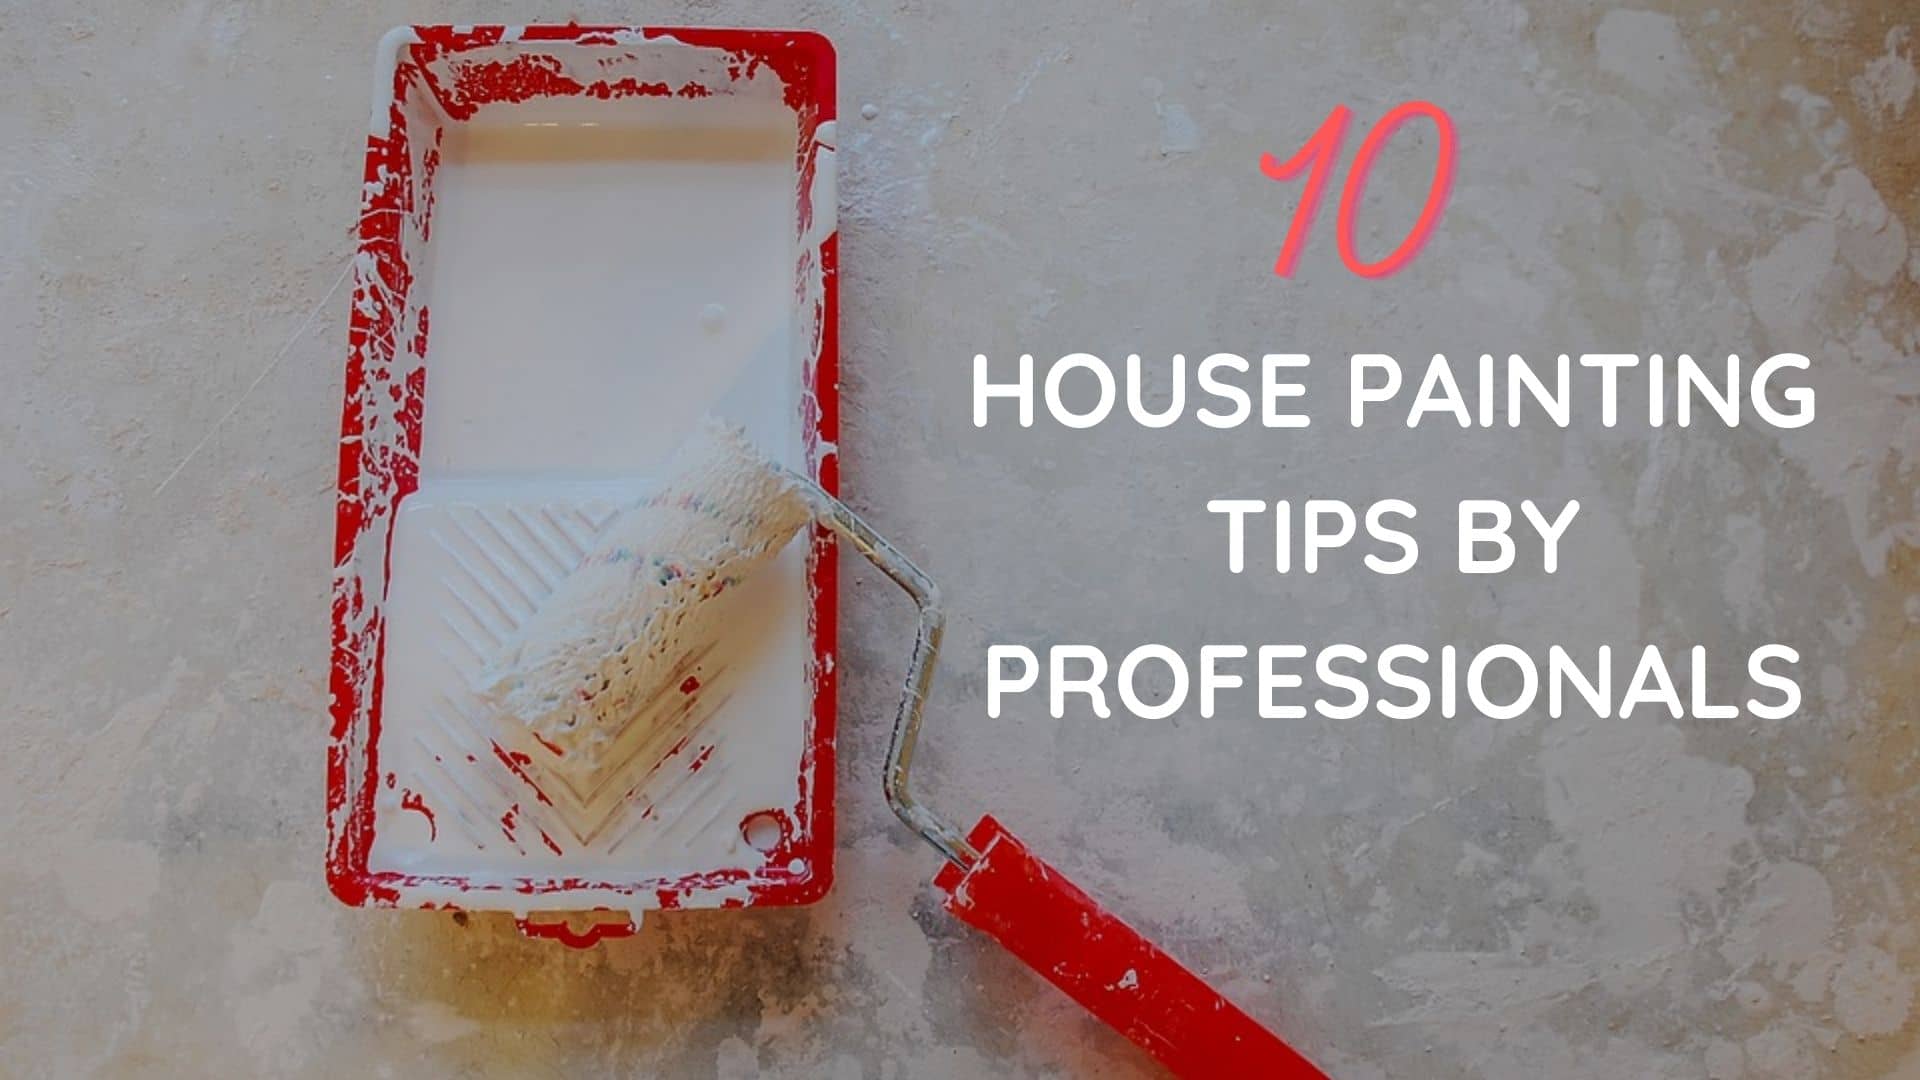 10 HOUSE PAINTING TIPS BY THE PROFESSIONALS.jpg